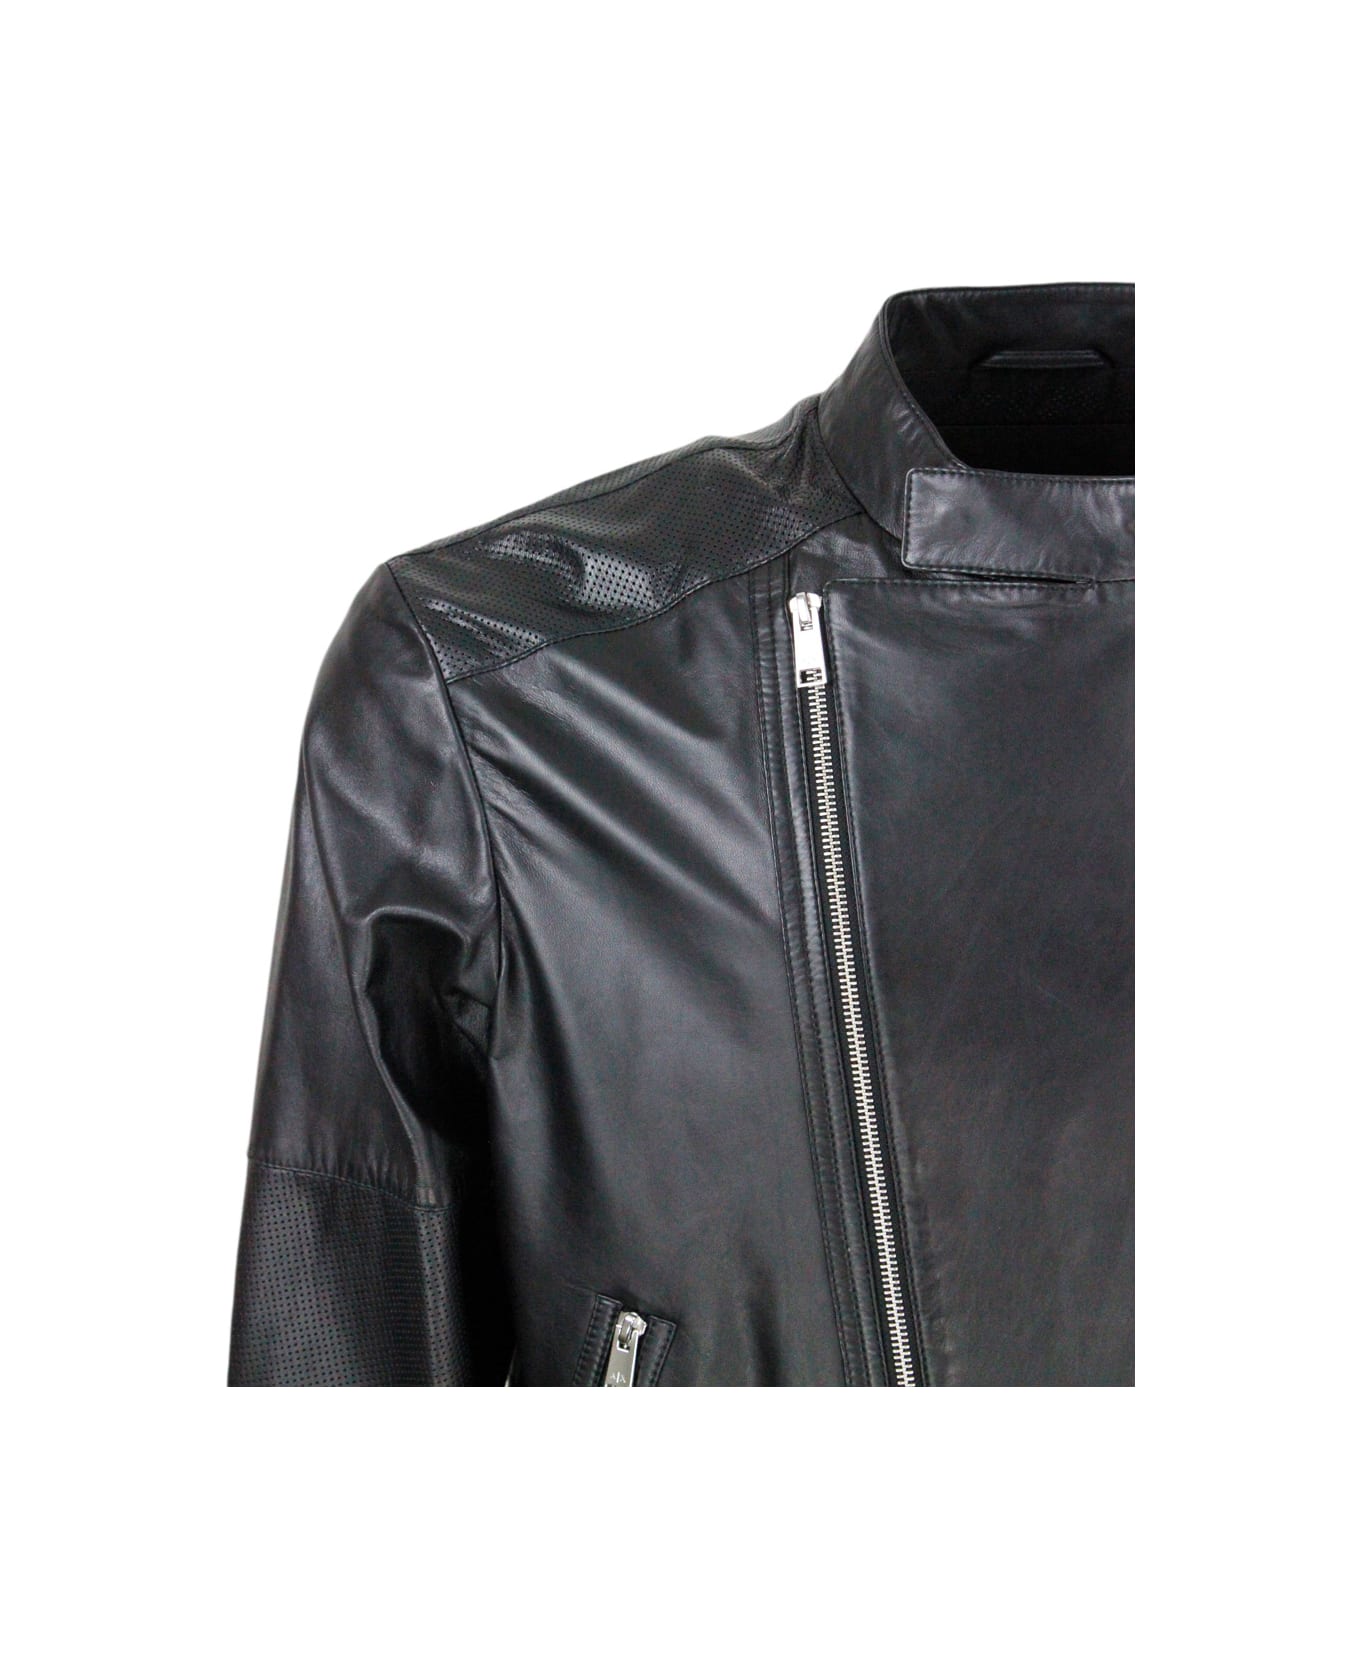 Armani Collezioni Jacket With Zip Closure Made Of Soft Lambskin With Perforated Leather Details. Zip On Pockets And Cuffs - Black